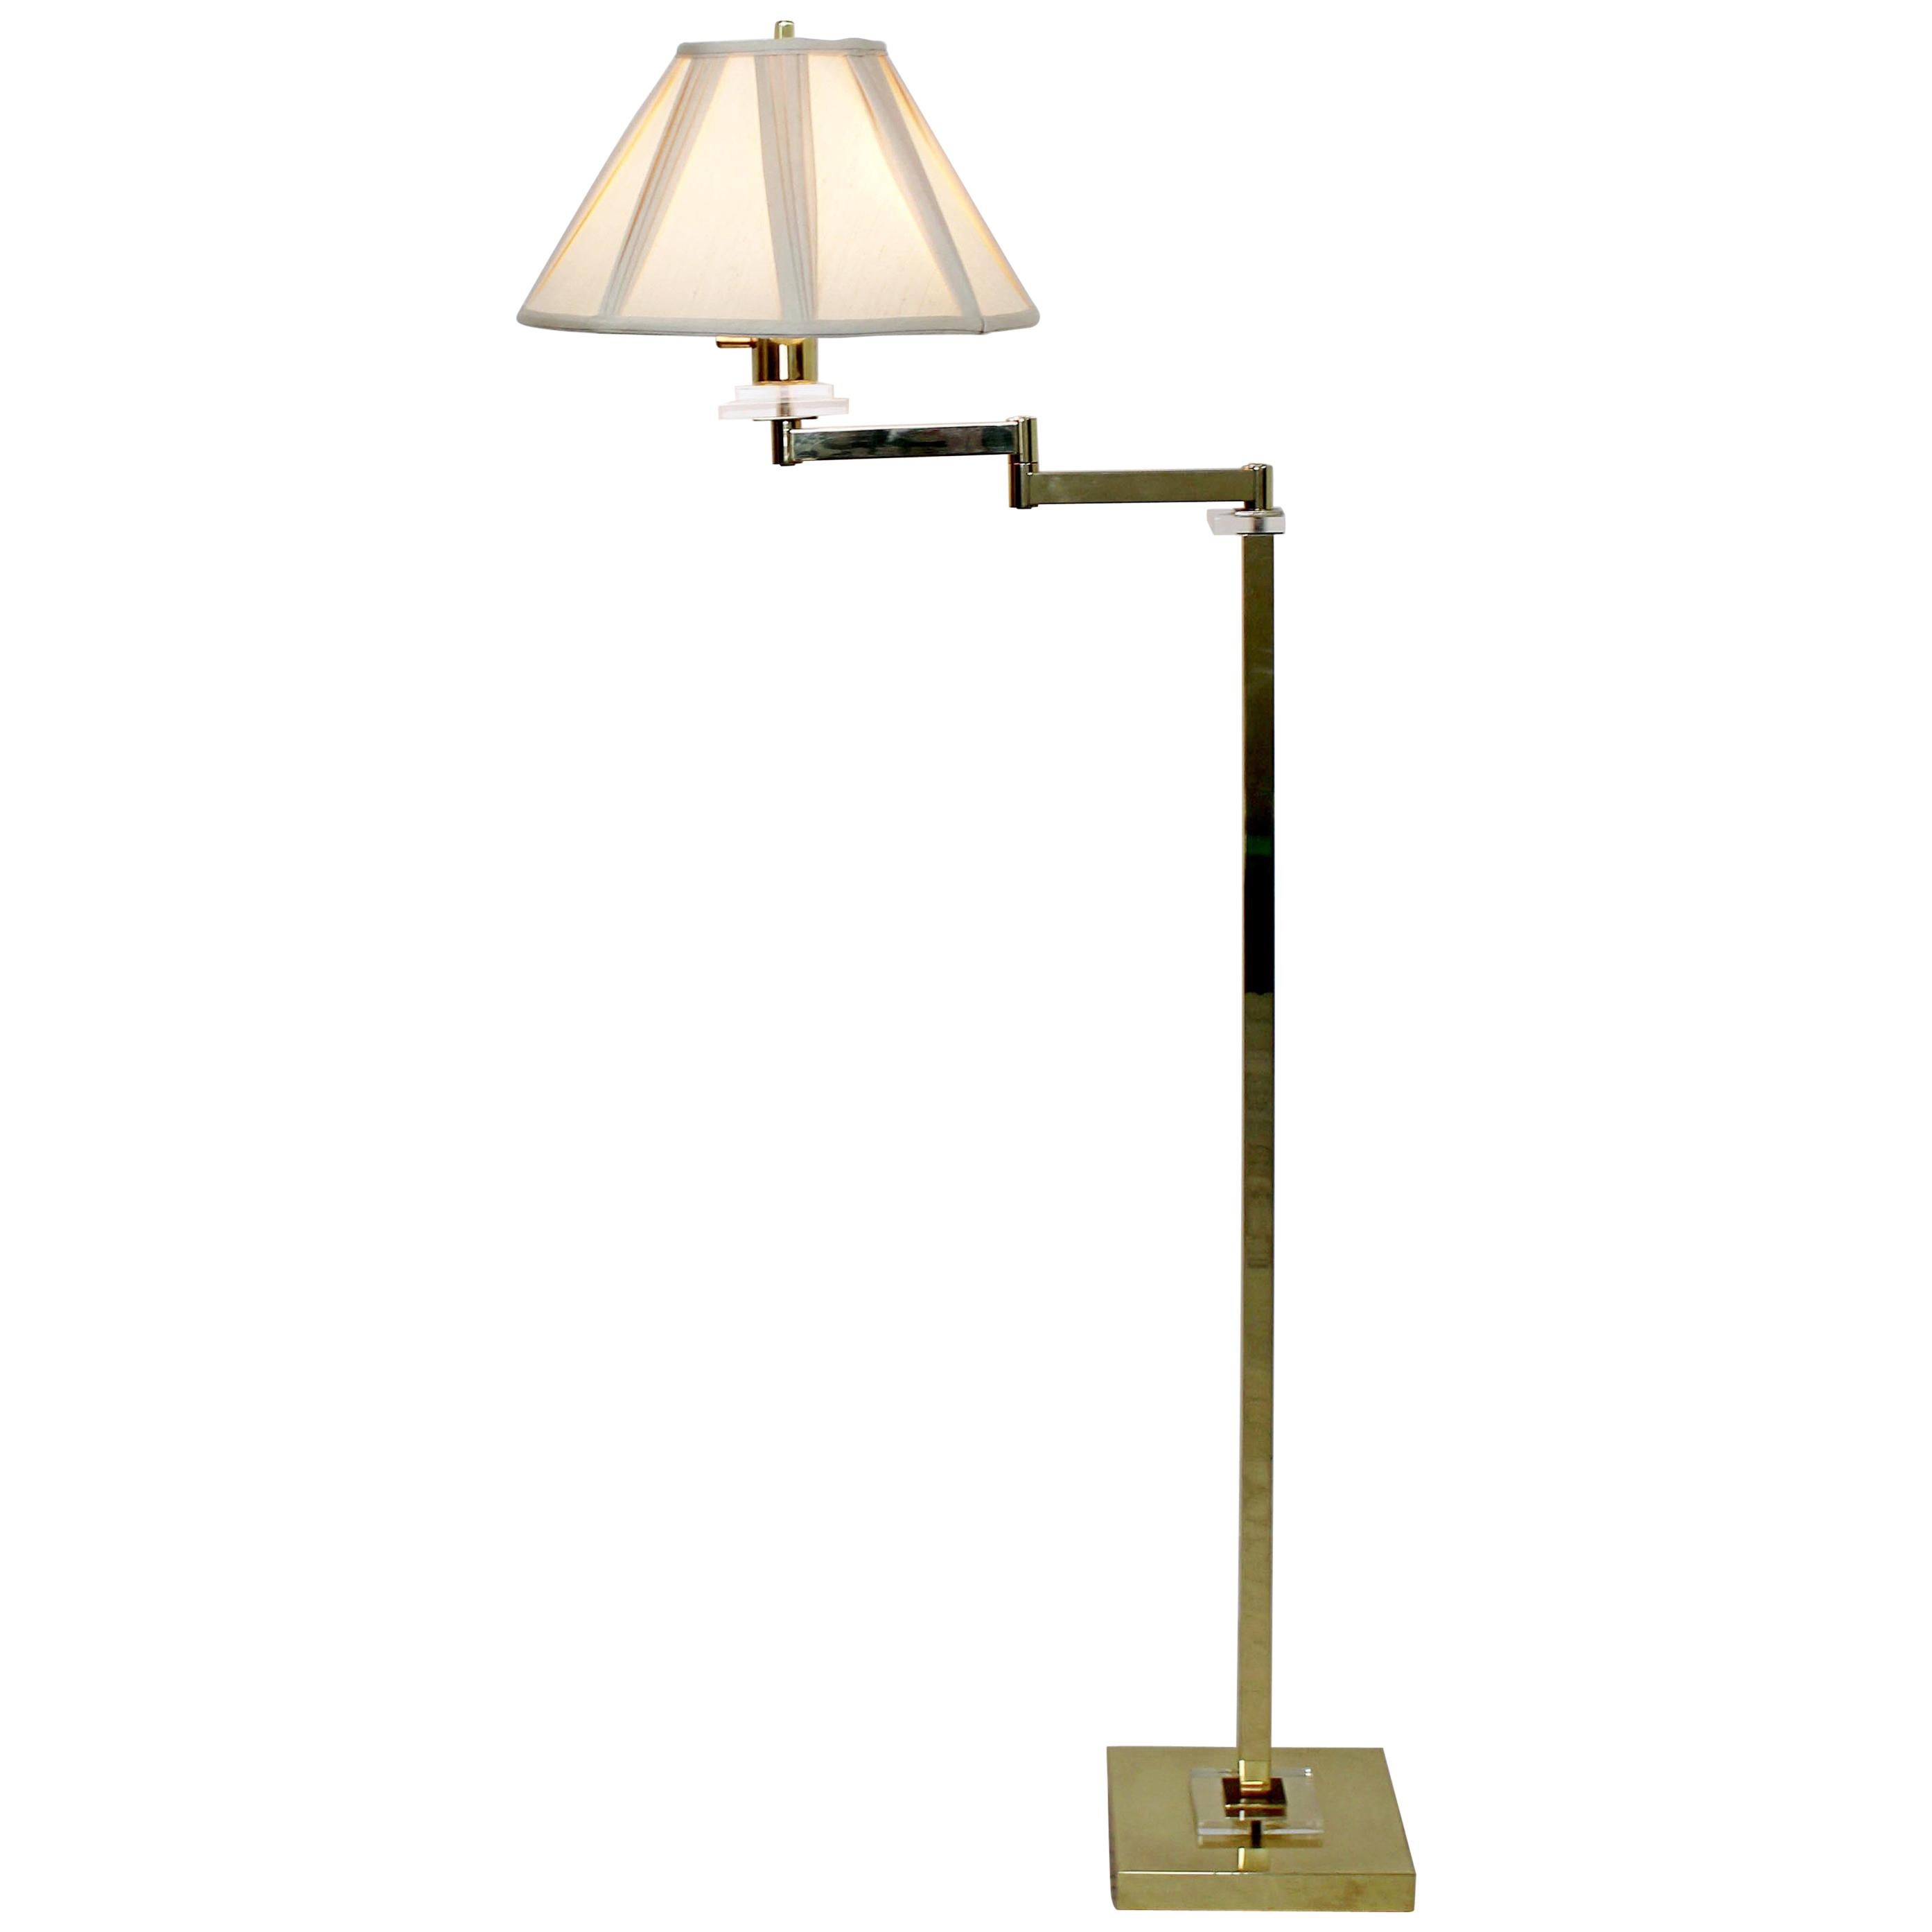 Mid-Century Modern Lucite and Brass Swing Arm Articulating Floor Lamp, 1970s